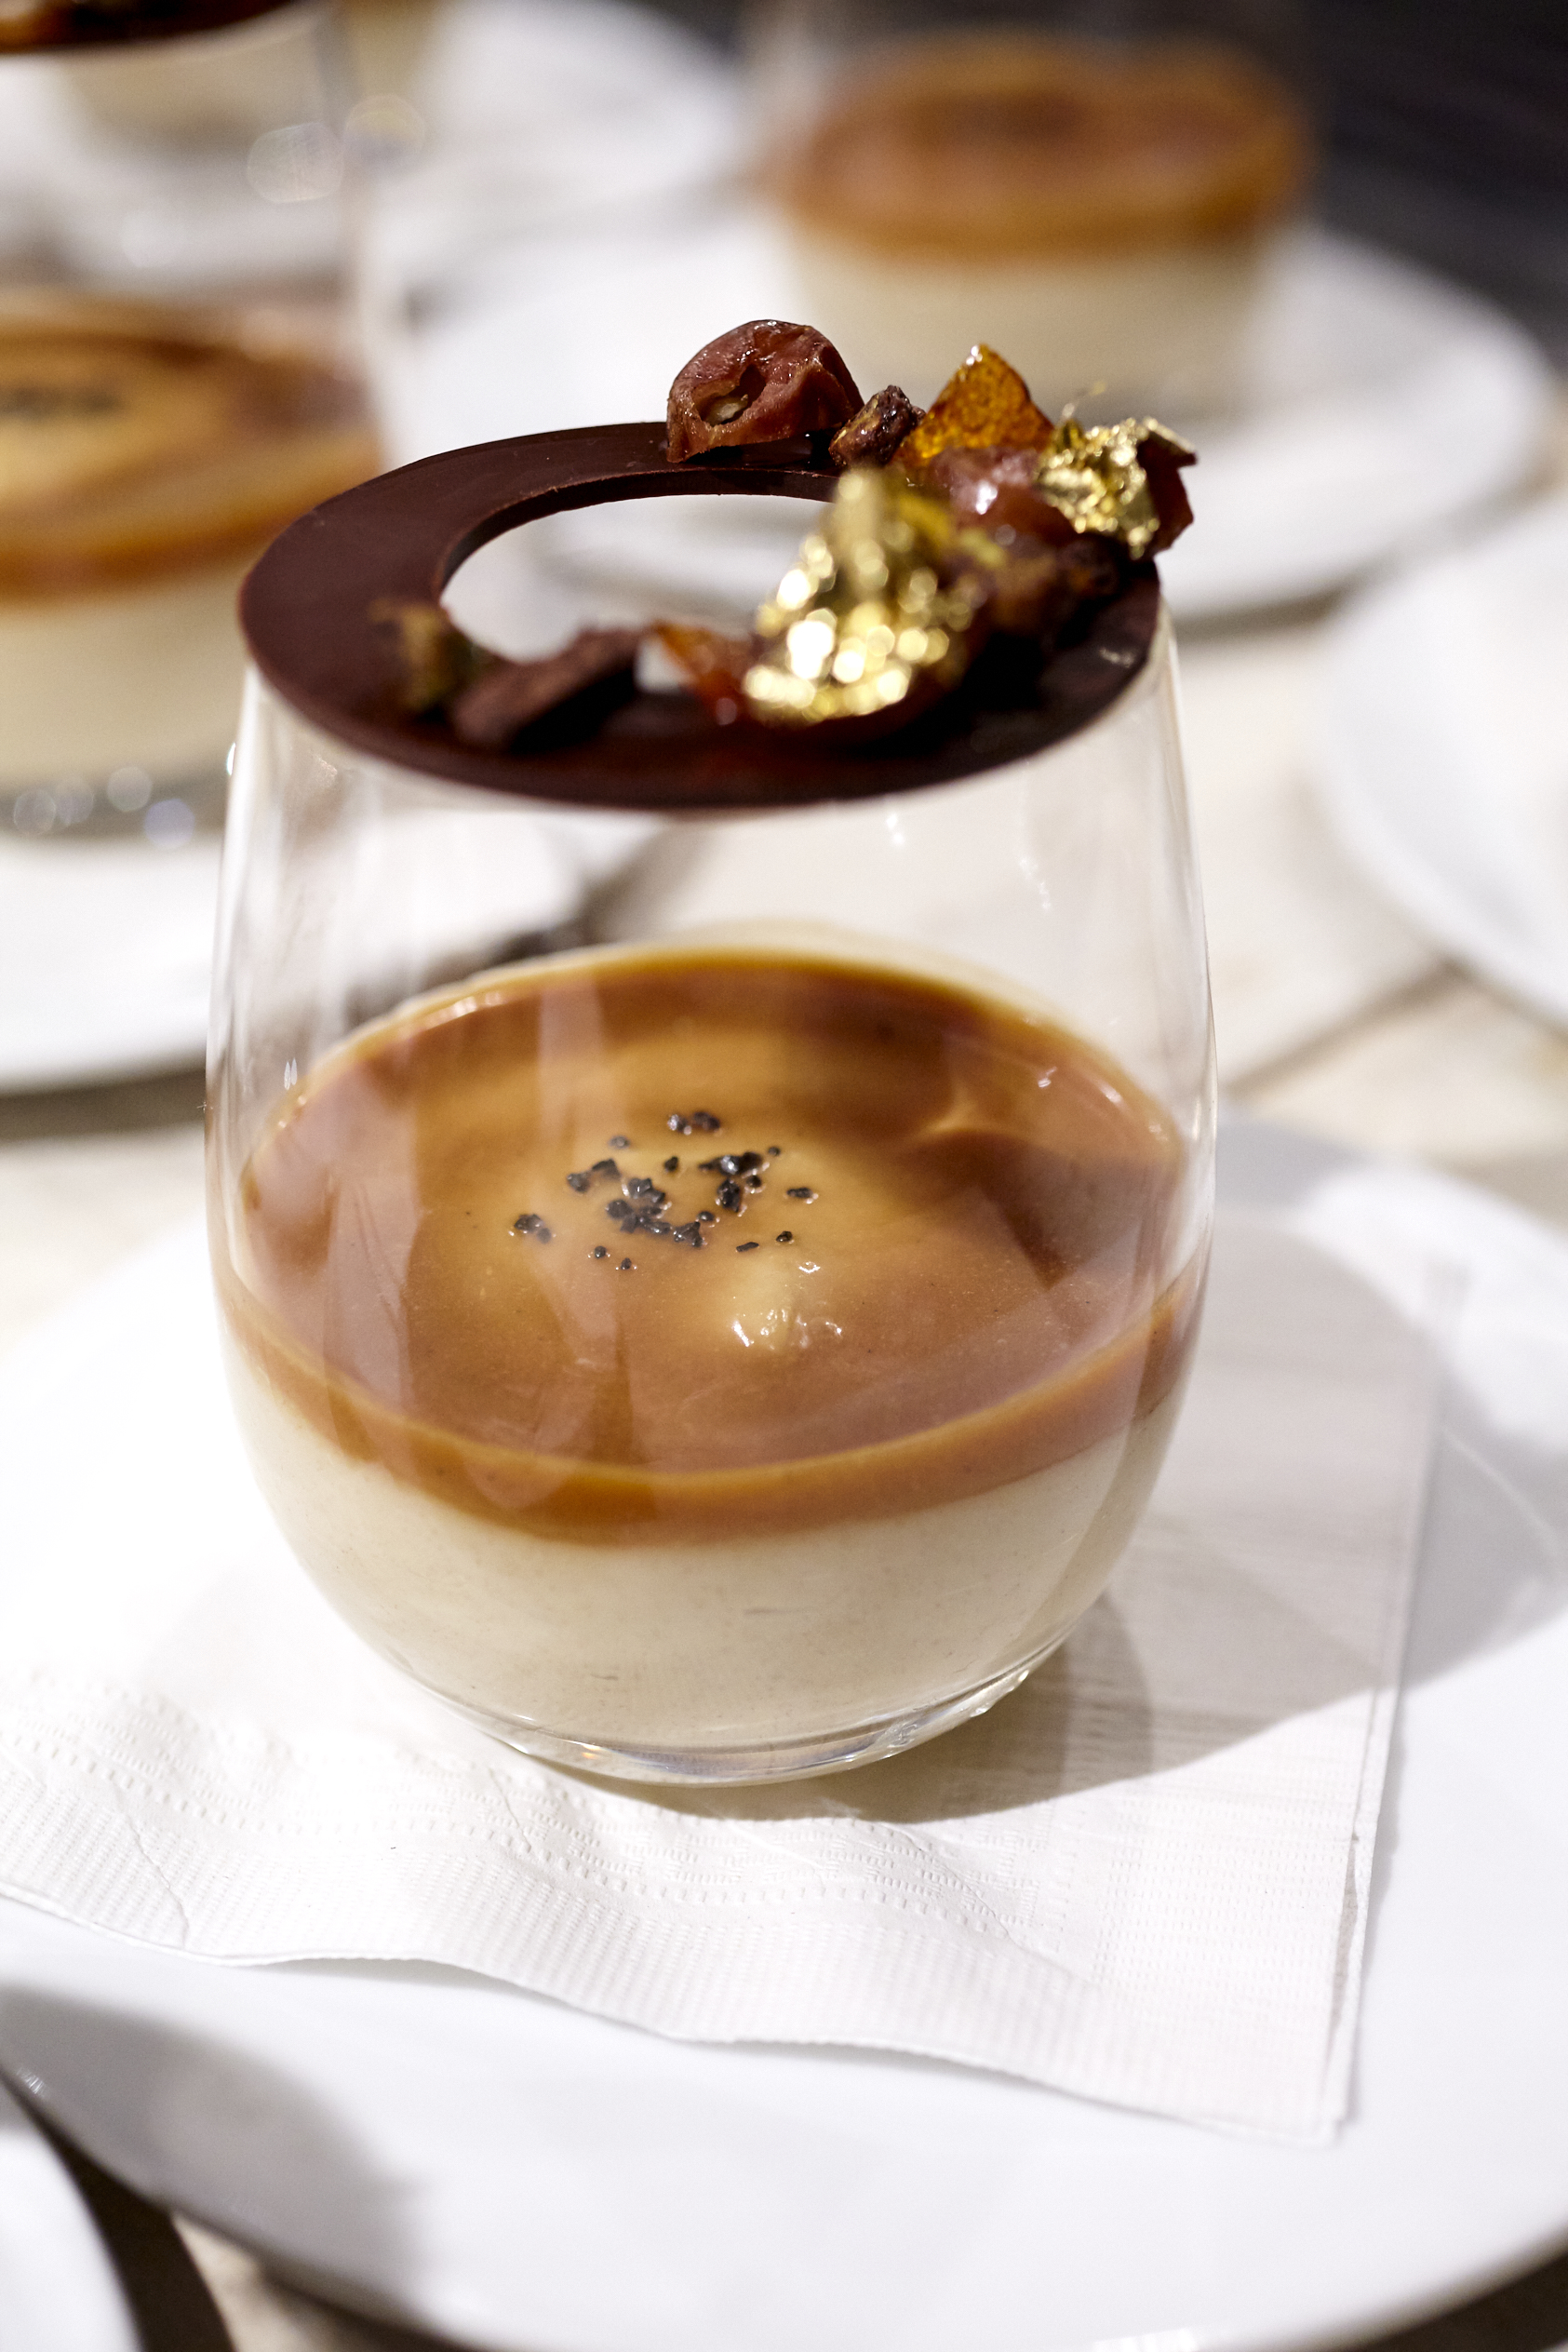 Schaffer, The Best Catering Company  in Los Angeles Serving Date Budino with Salted Caramel.